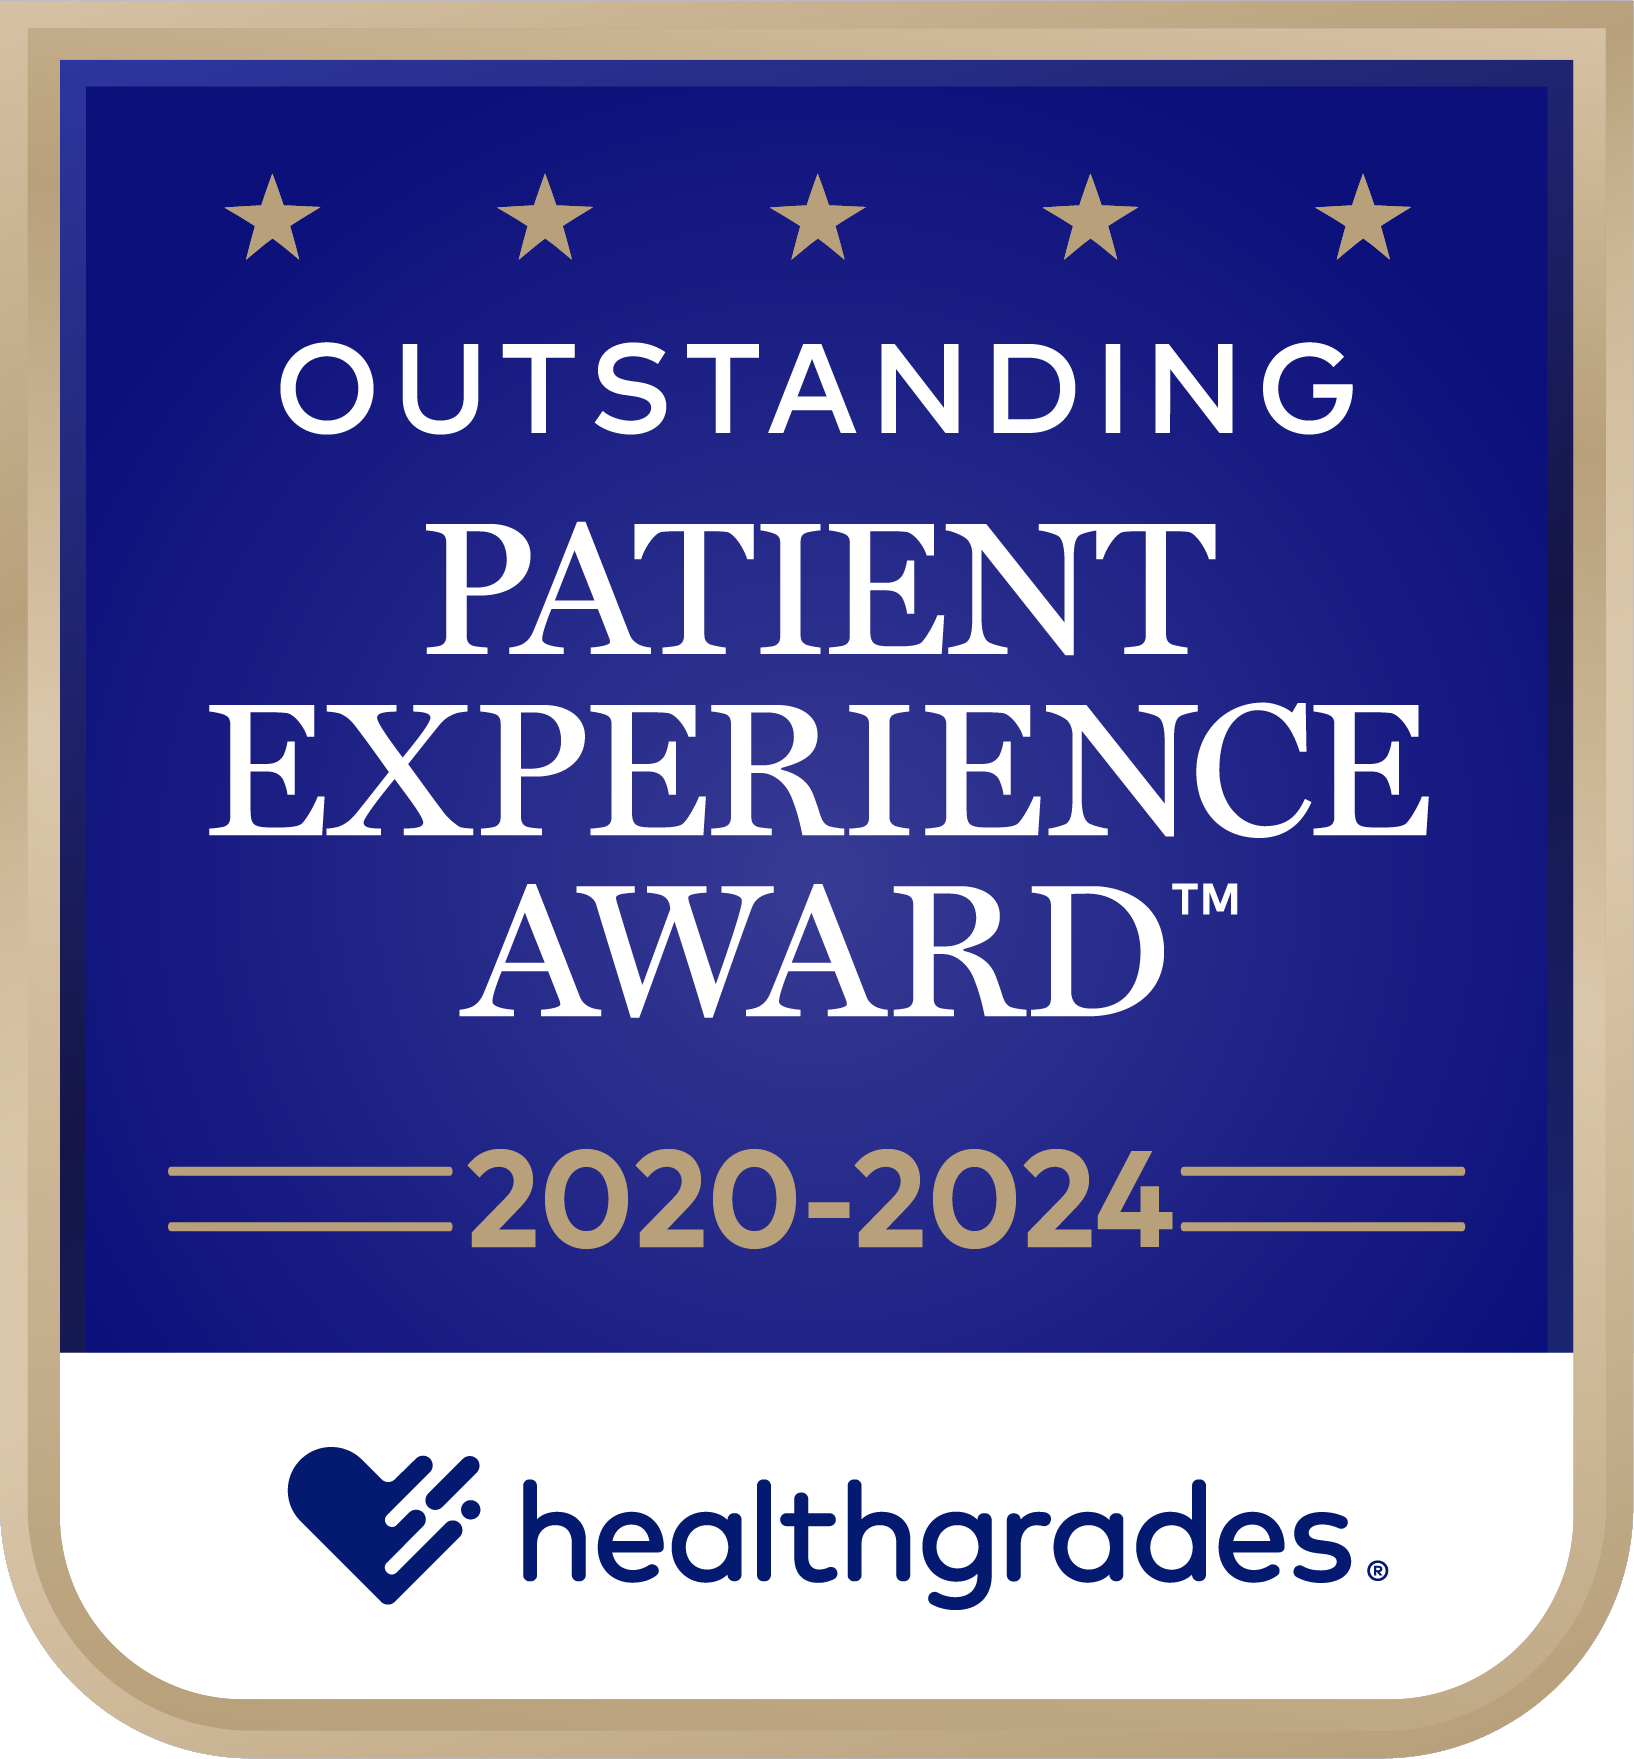 Patient Experience Award 2020-2022